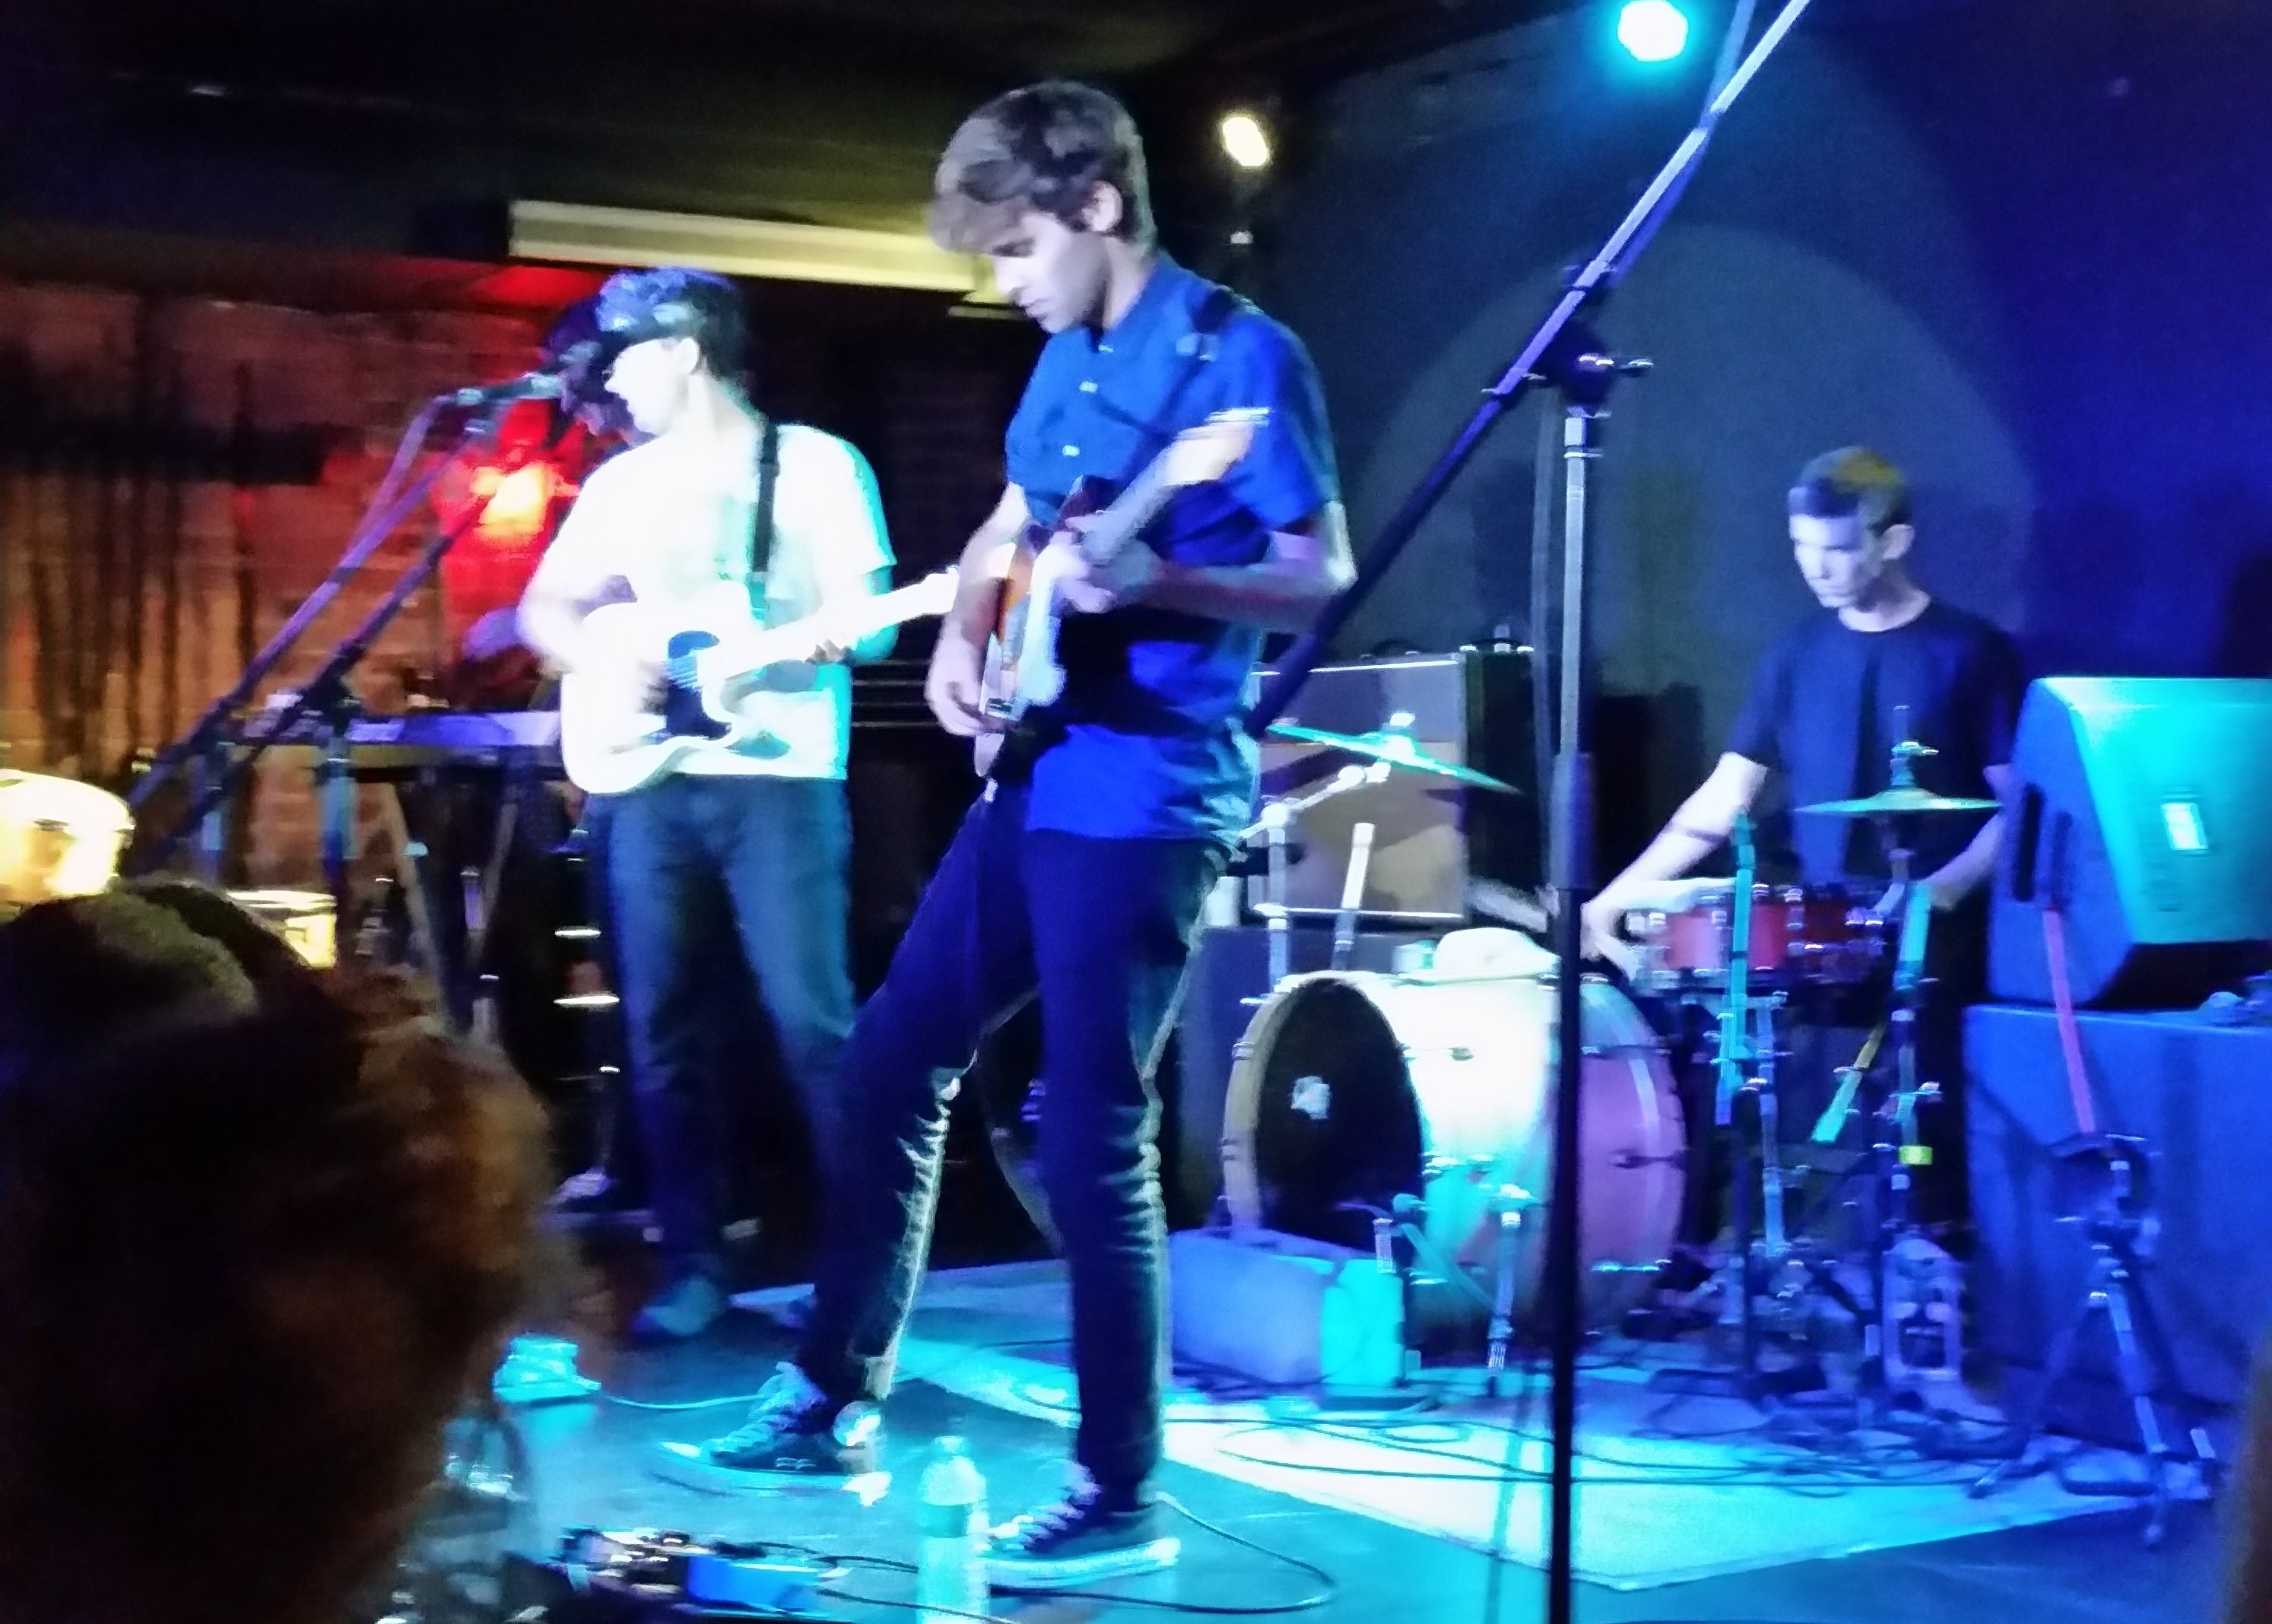 Alice Severin reviews Daywave's show in New York City at the Mercury Lounge.